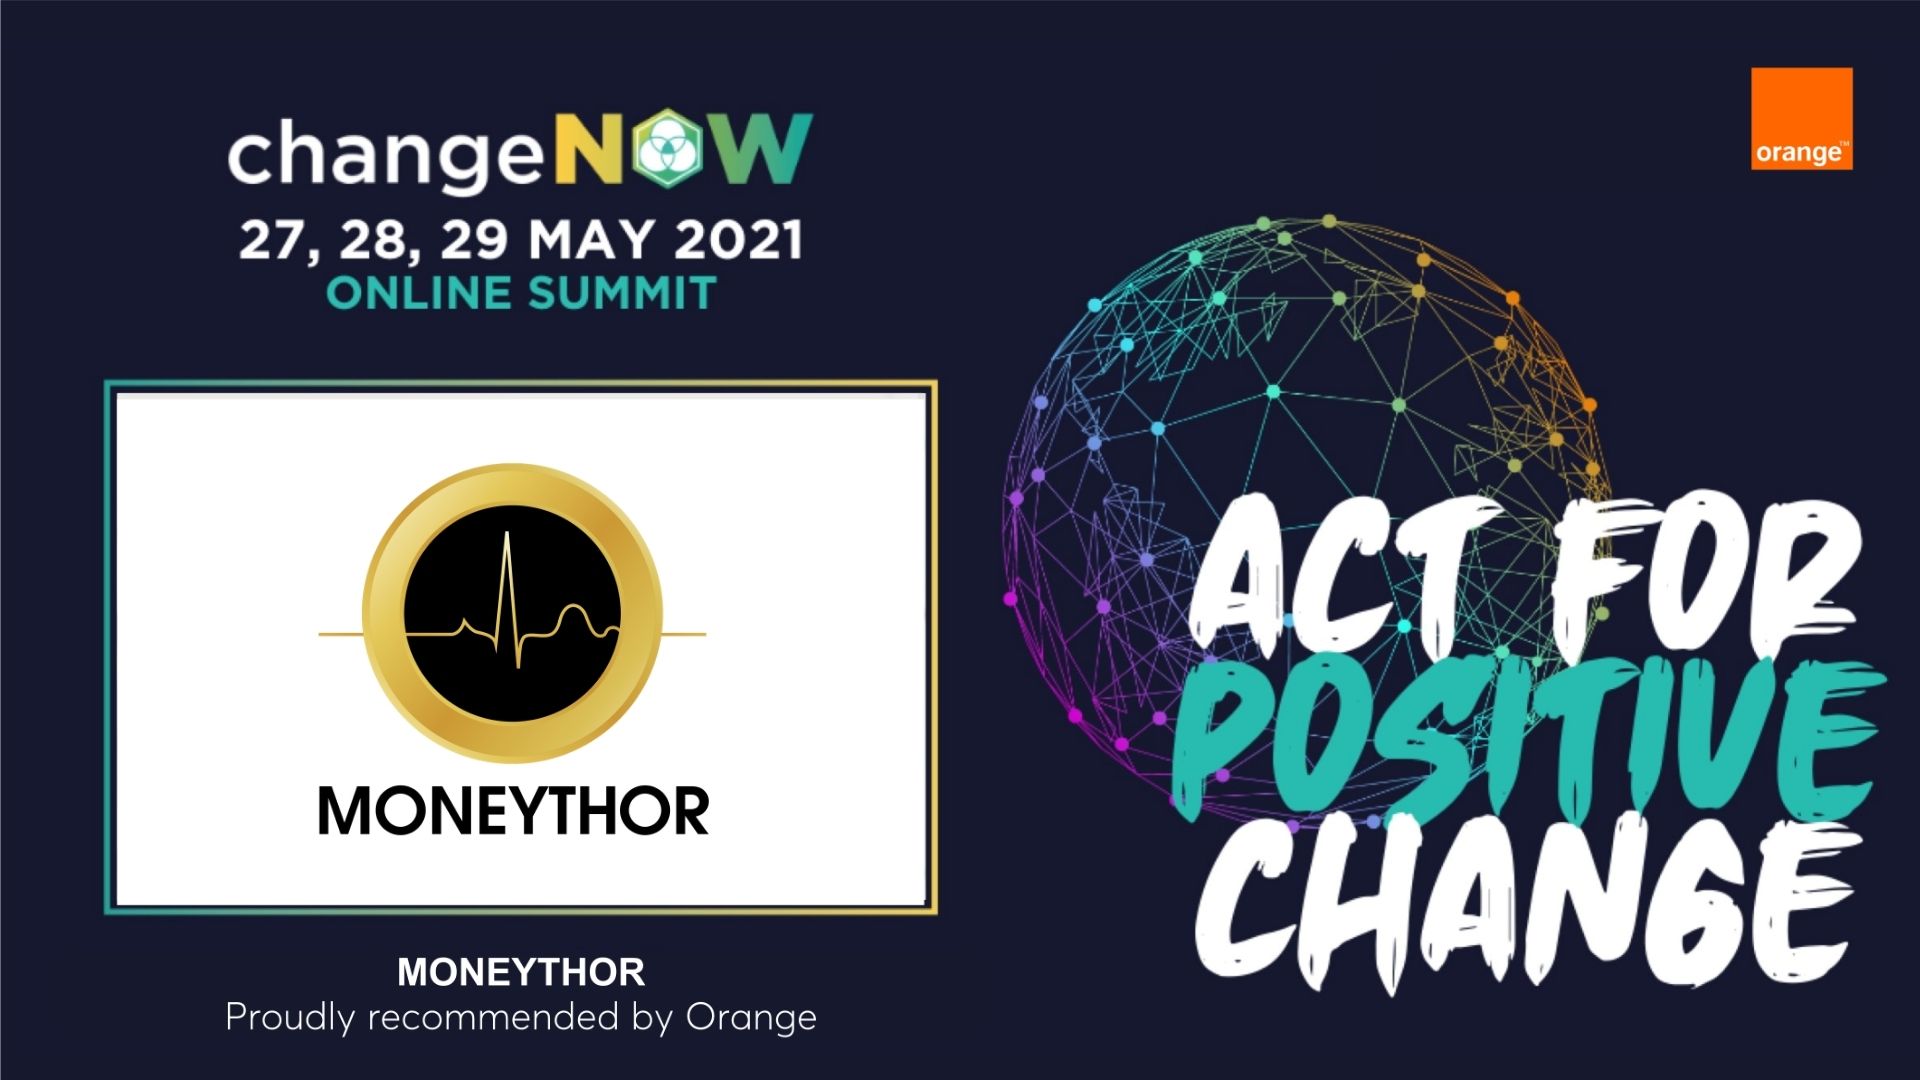 Moneythor is proud to be invited by Orange to ChangeNOW 2021